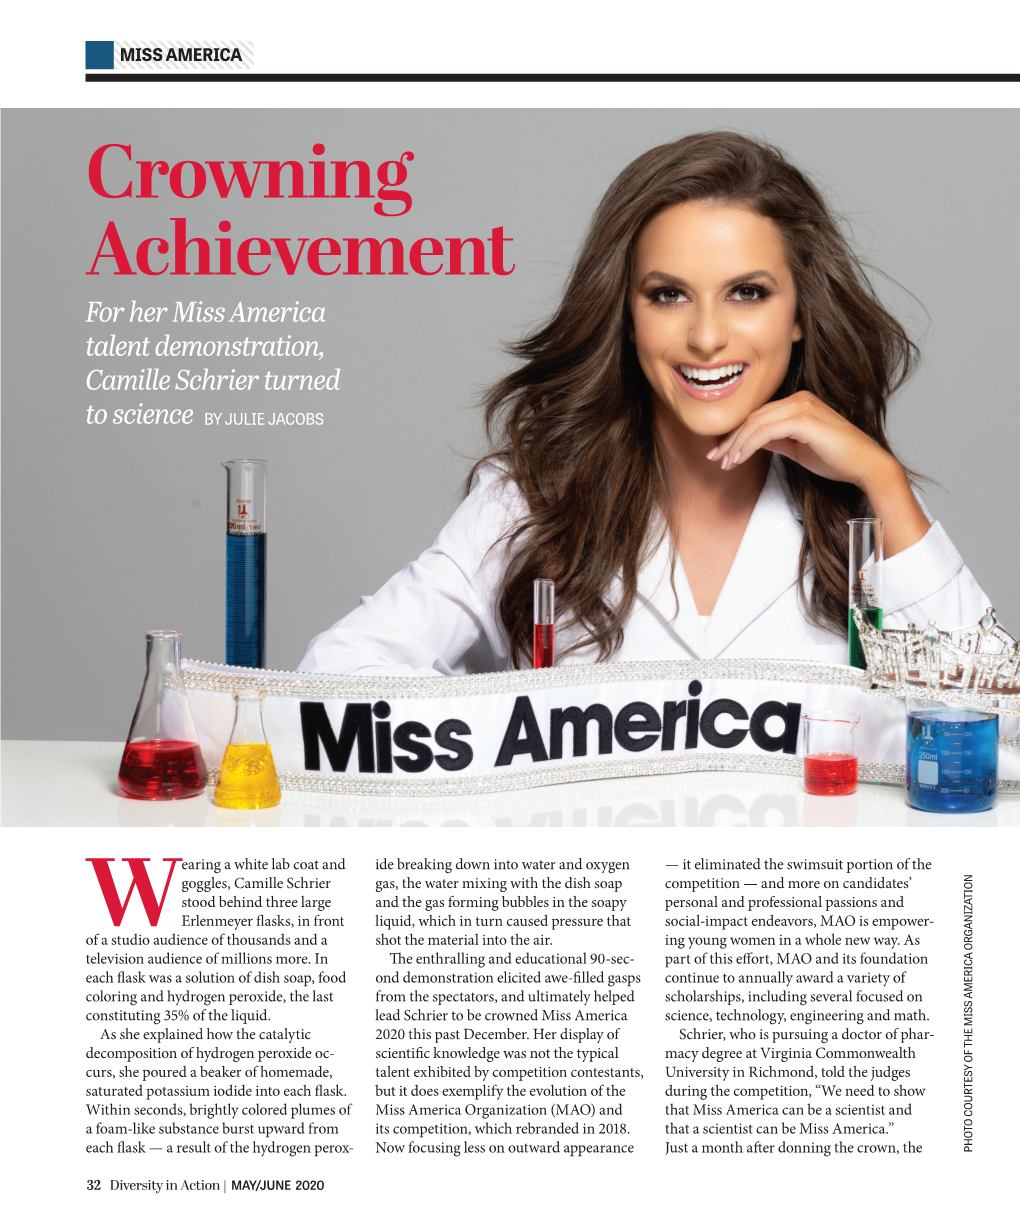 Crowning Achievement for Her Miss America Talent Demonstration, Camille Schrier Turned to Science by JULIE JACOBS